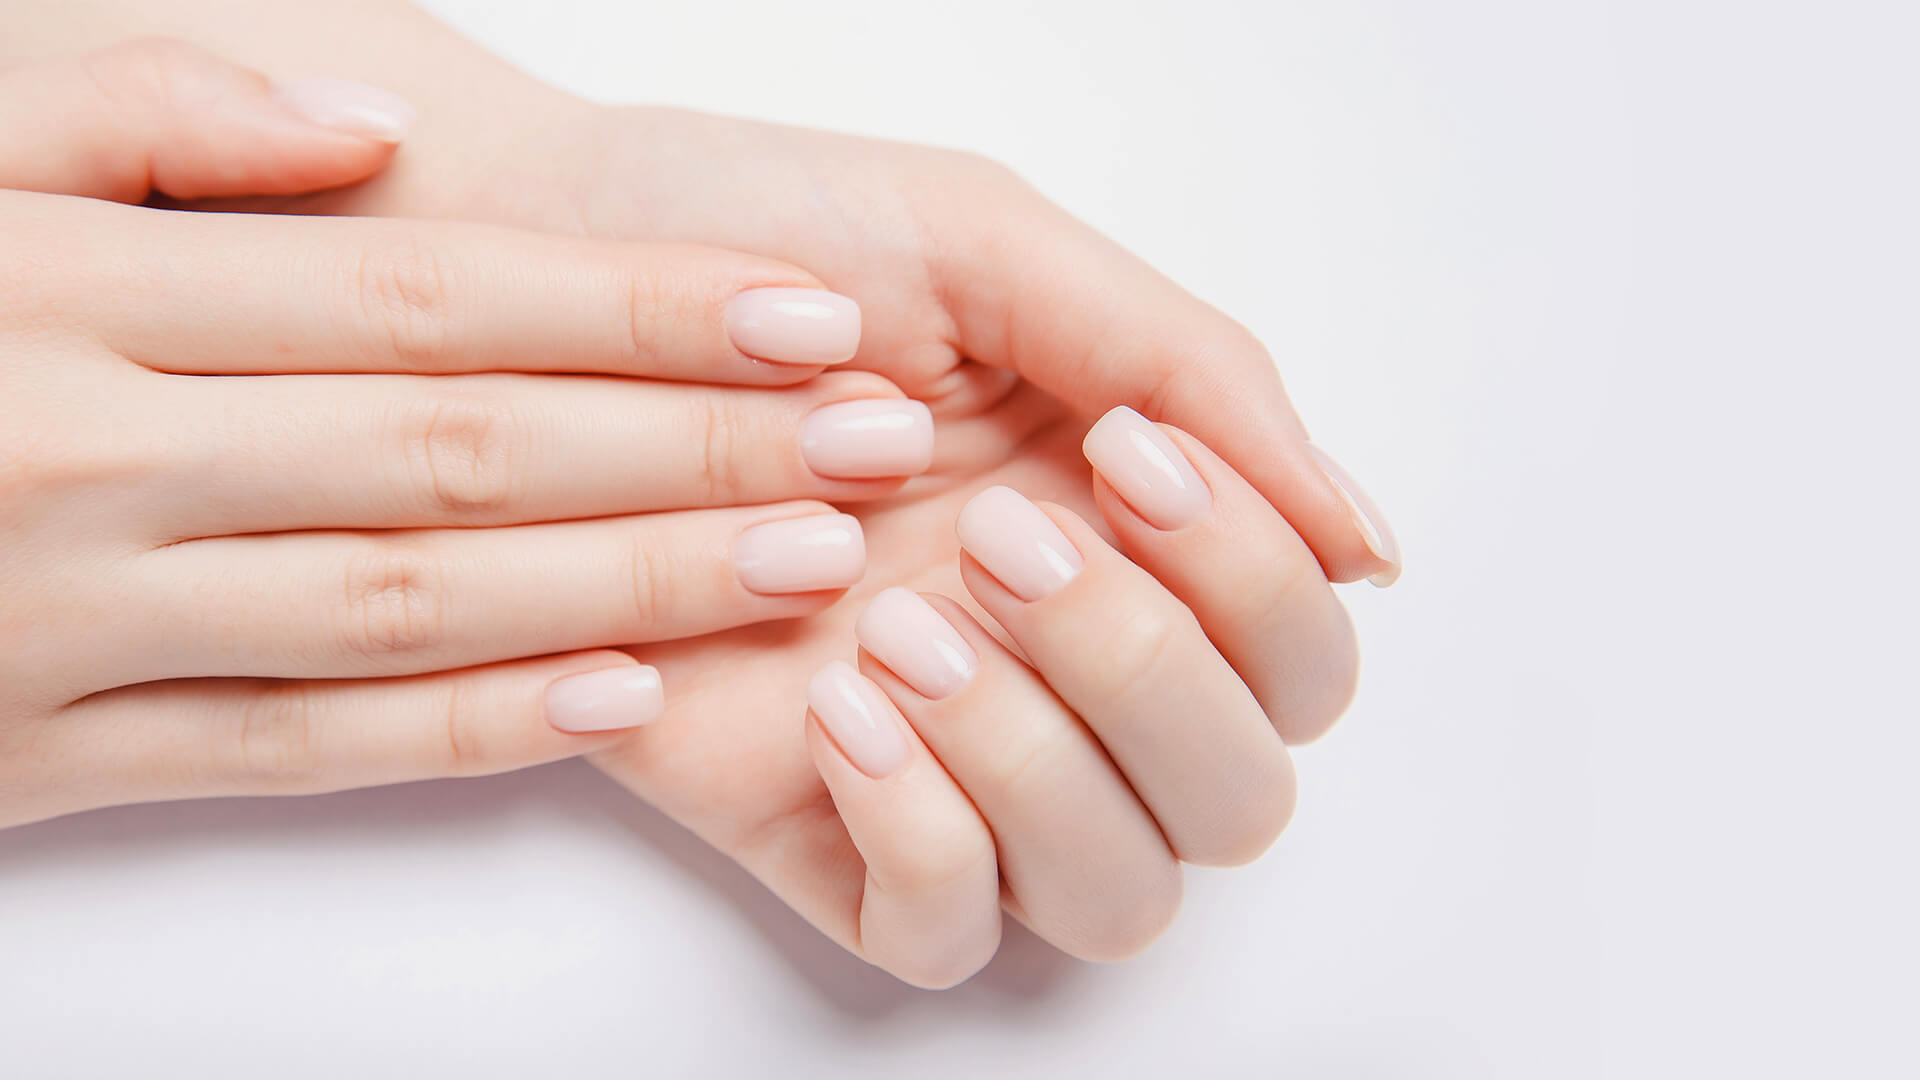 How to Know if You Need a Private Label Antifungal for Nails